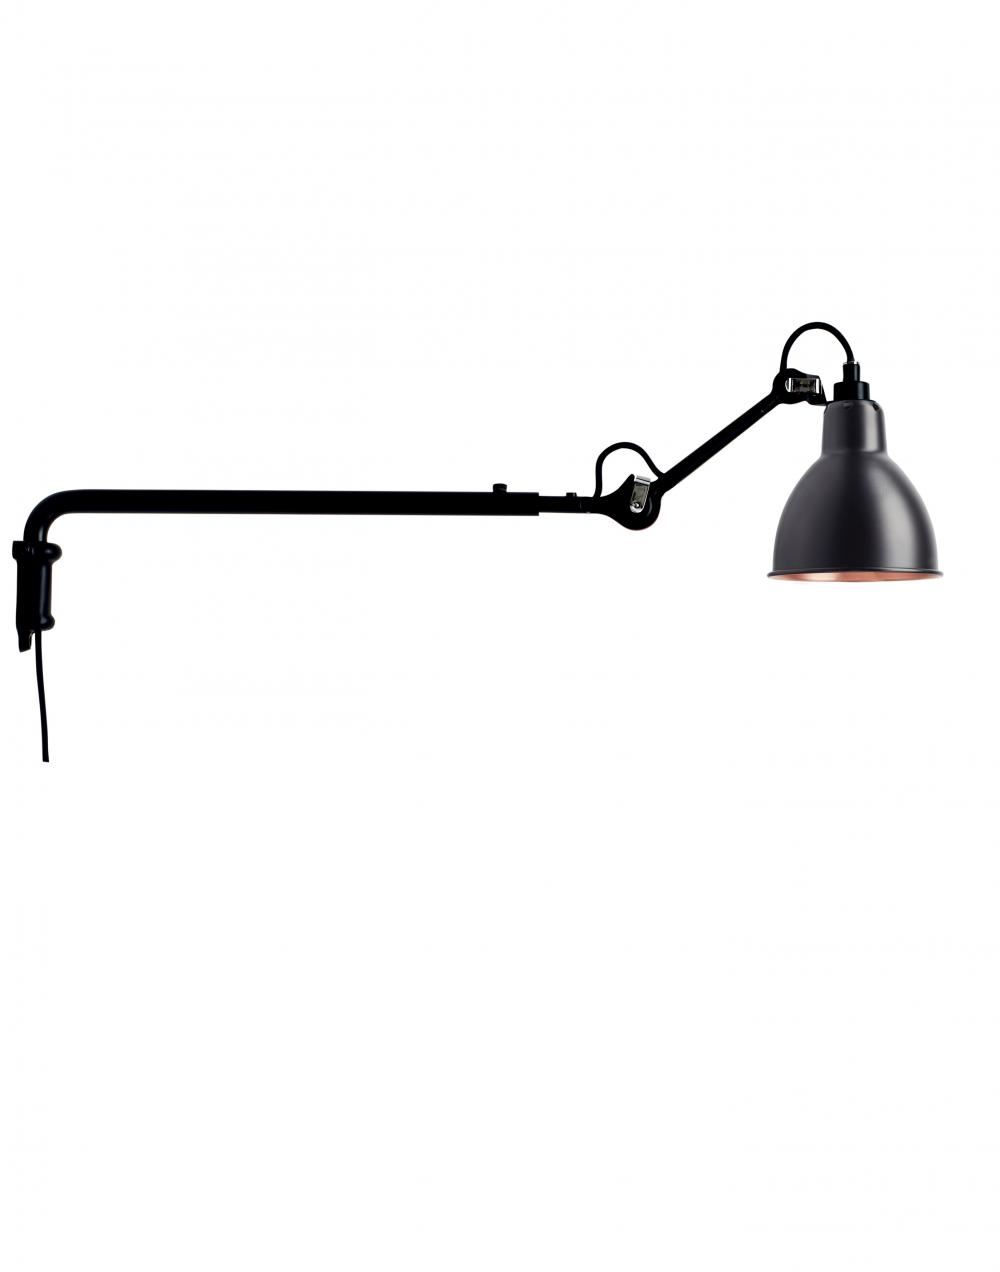 Lampe Gras 203 Wall Lamp Black Shade With Copper Interior Round